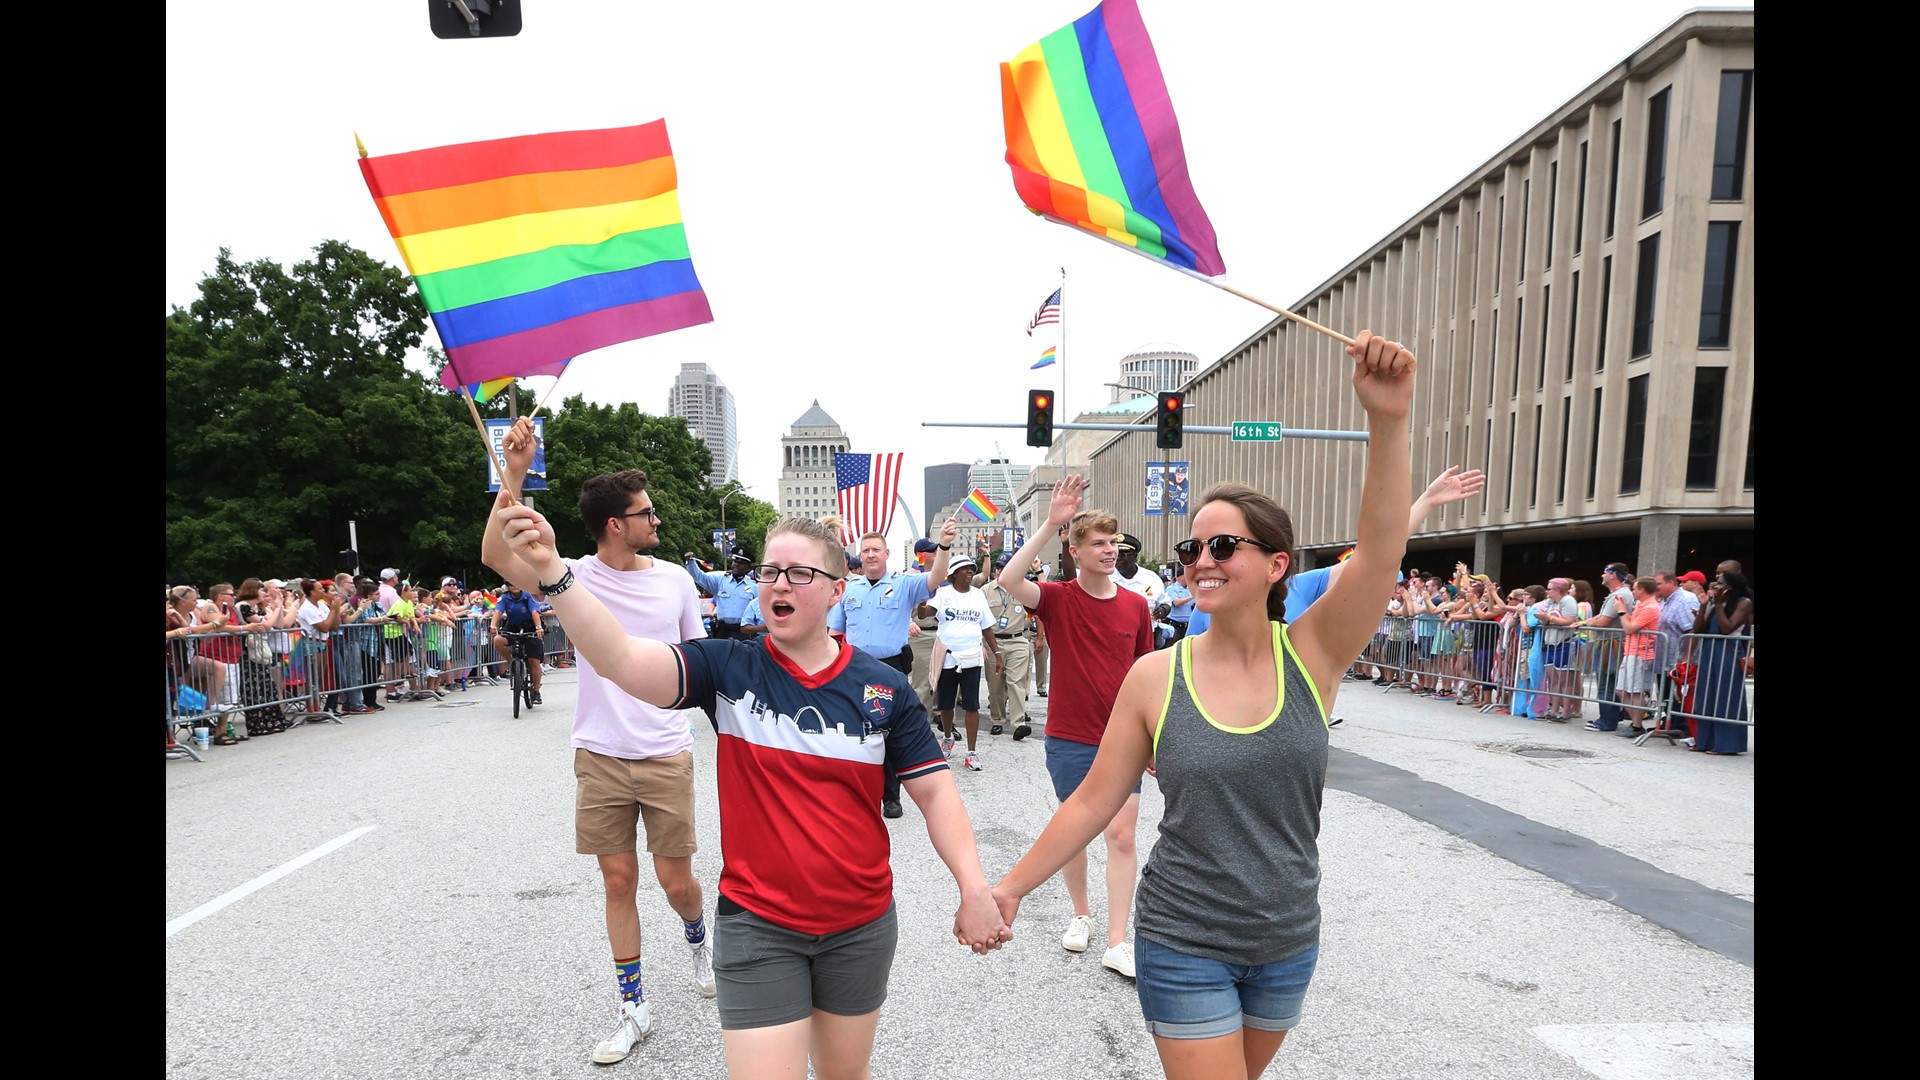 Thousands gather in St. Louis to support gay pride